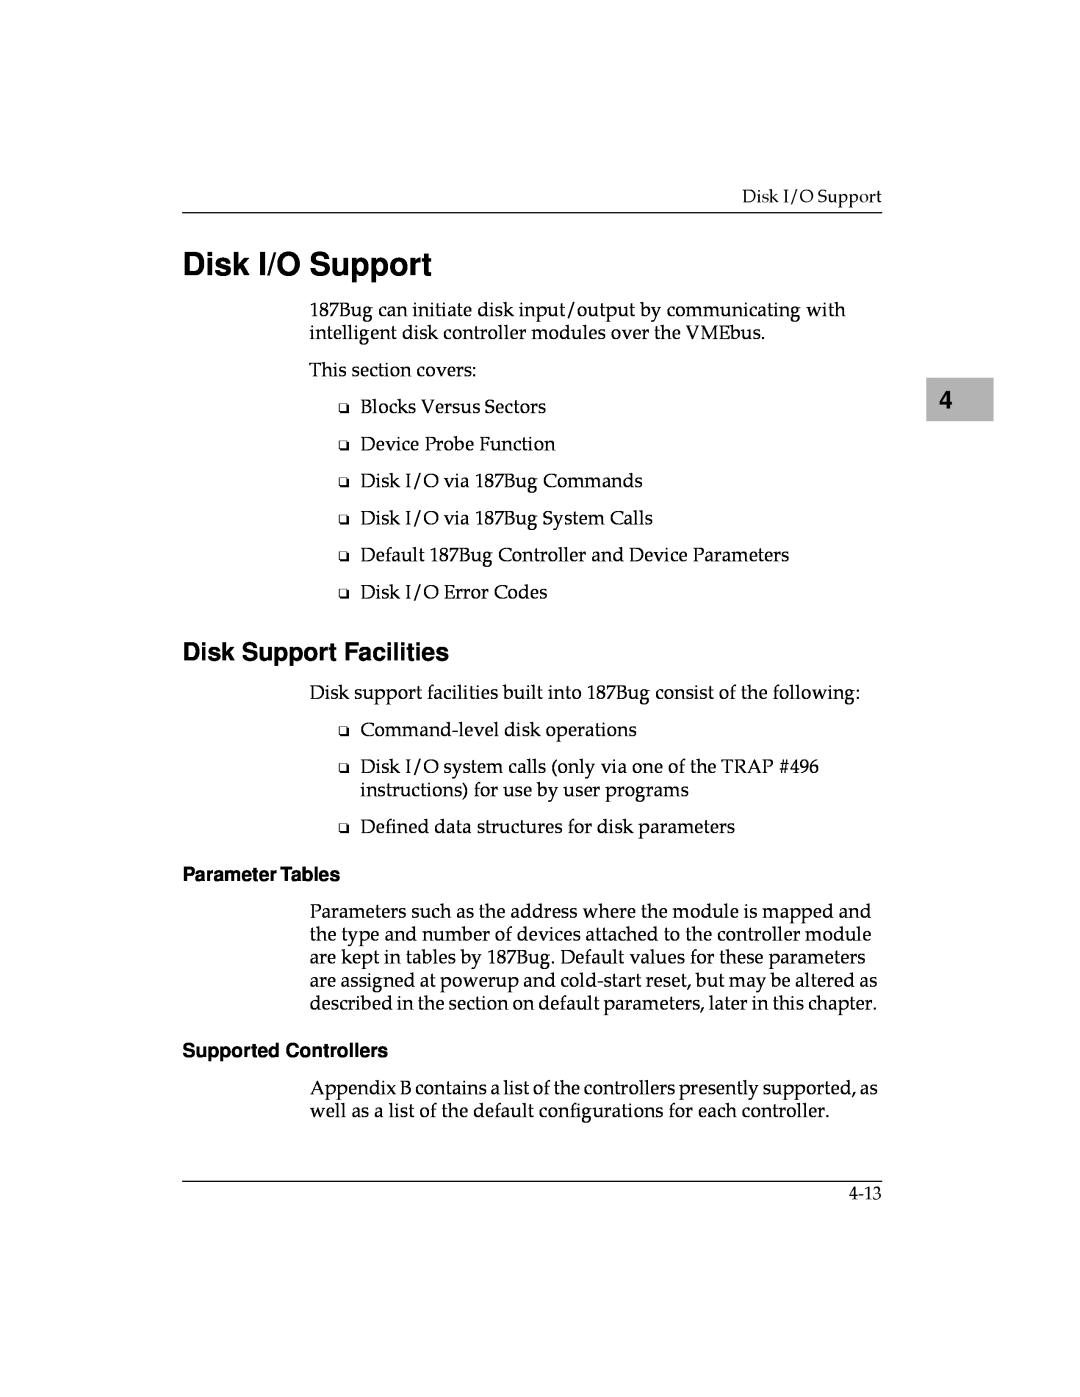 Motorola MVME187 manual Disk I/O Support, Disk Support Facilities, Parameter Tables, Supported Controllers 